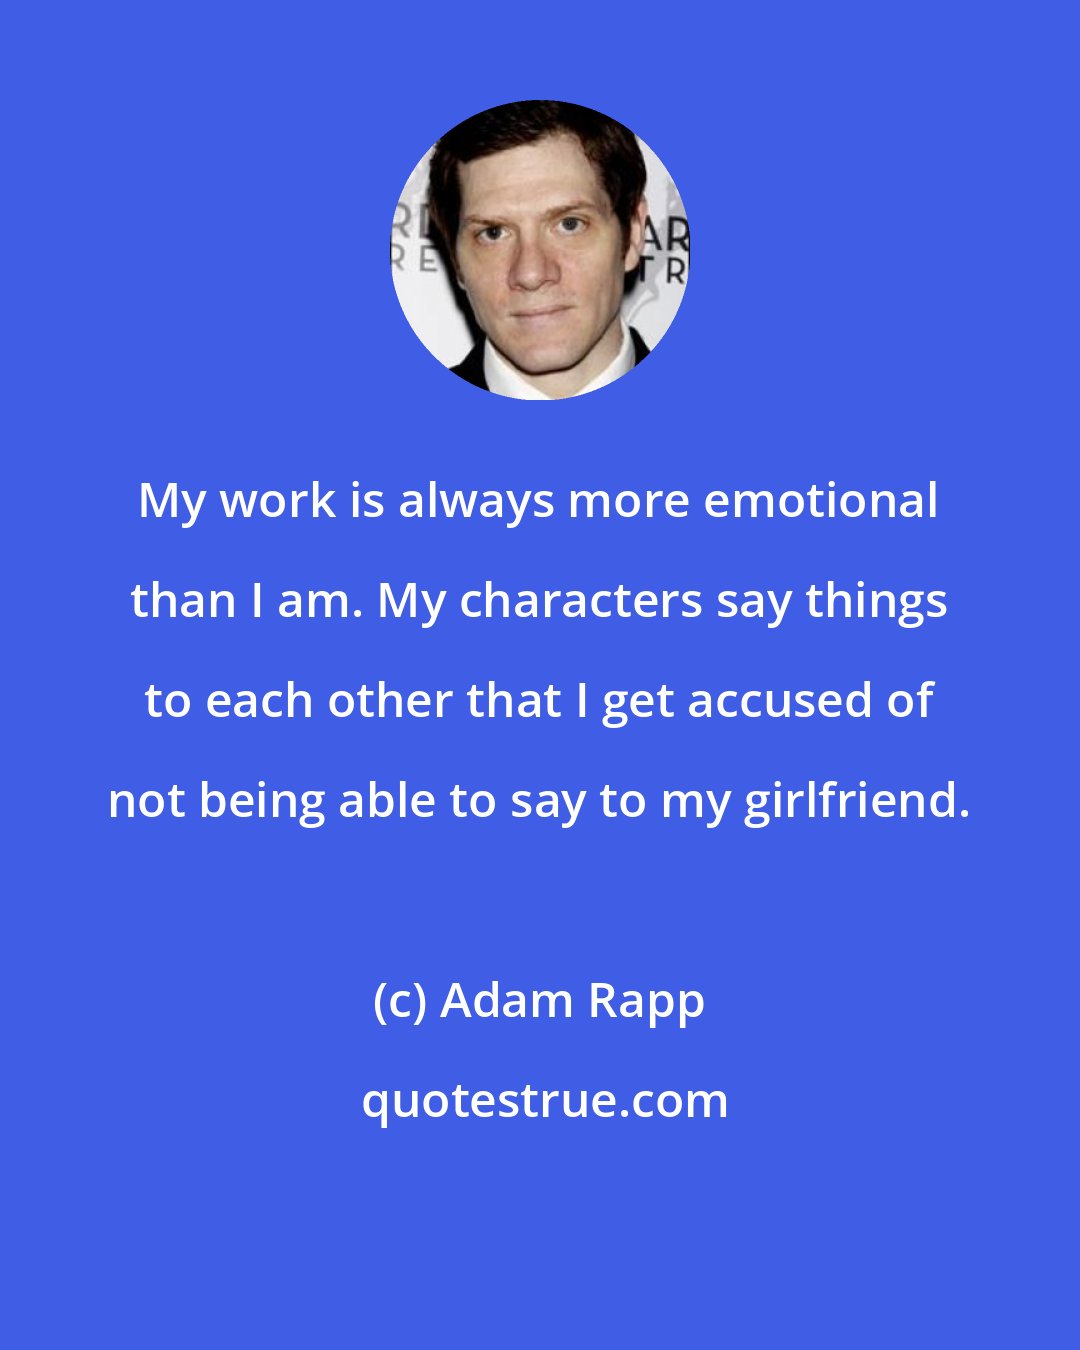 Adam Rapp: My work is always more emotional than I am. My characters say things to each other that I get accused of not being able to say to my girlfriend.